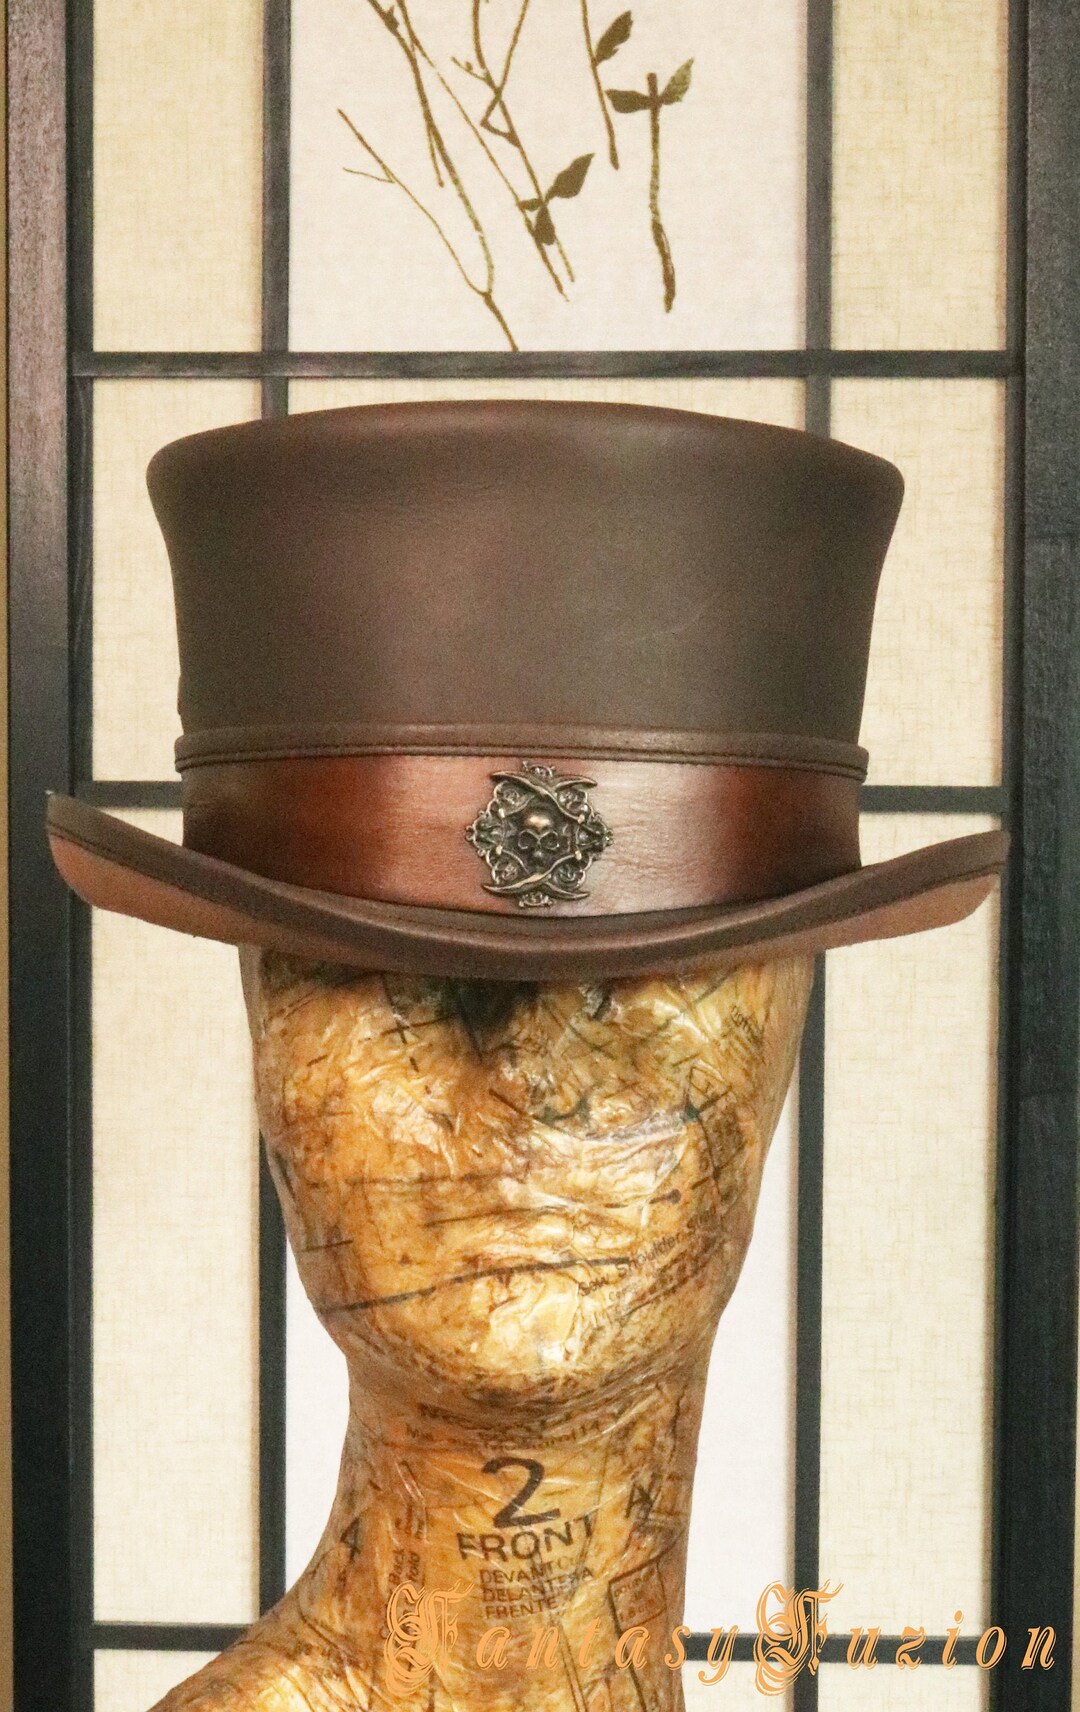 Buy Leather Steampunk Bowler Hat Custom Size Online in India 